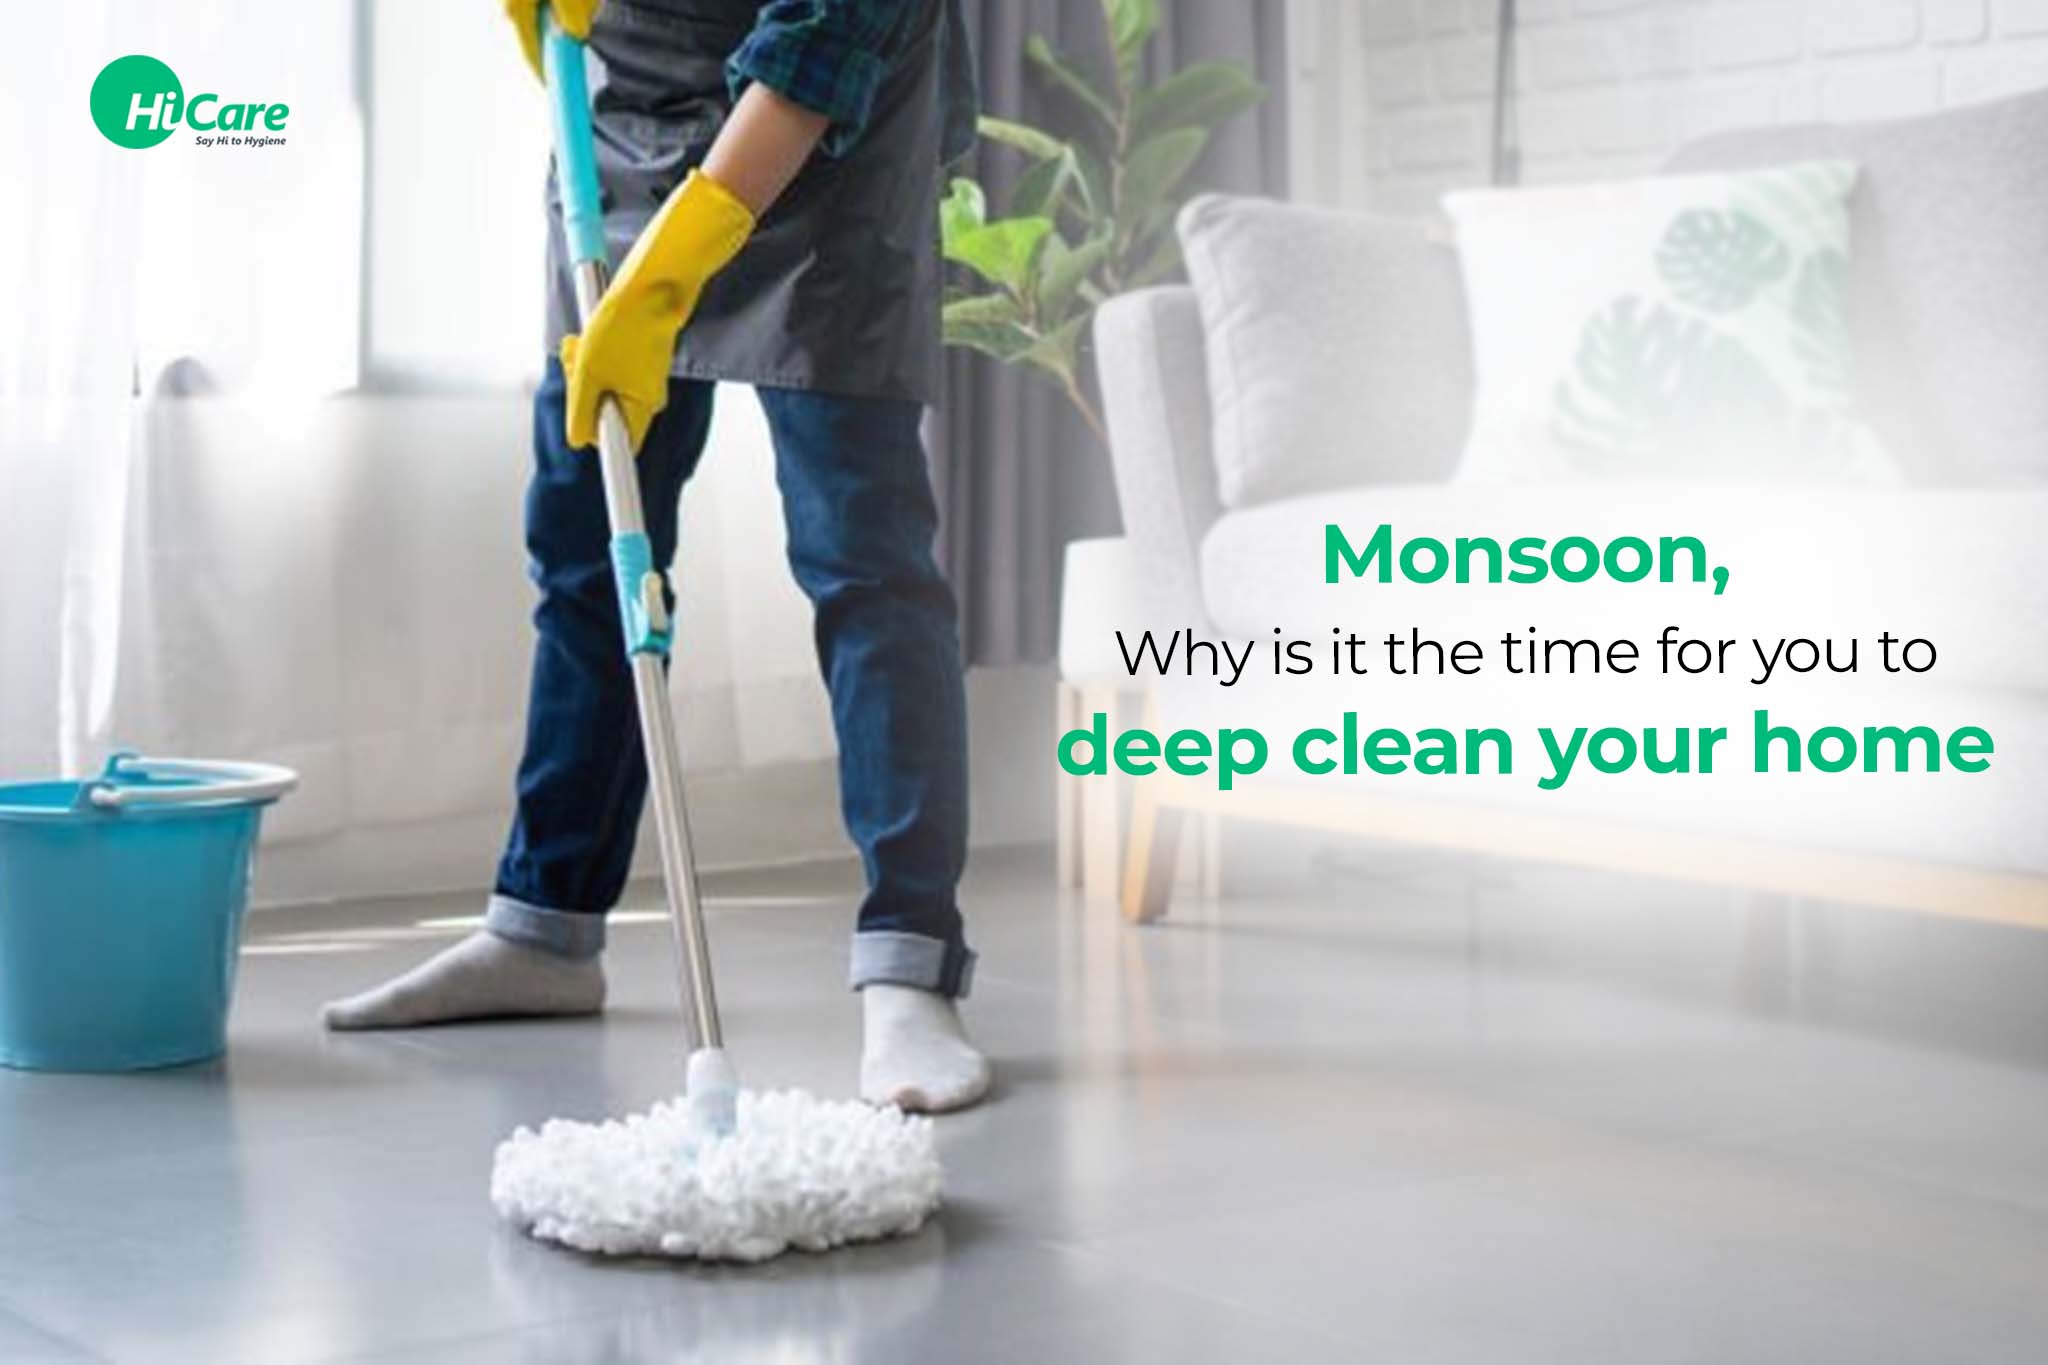 monsoon is the time for you to deep clean your home